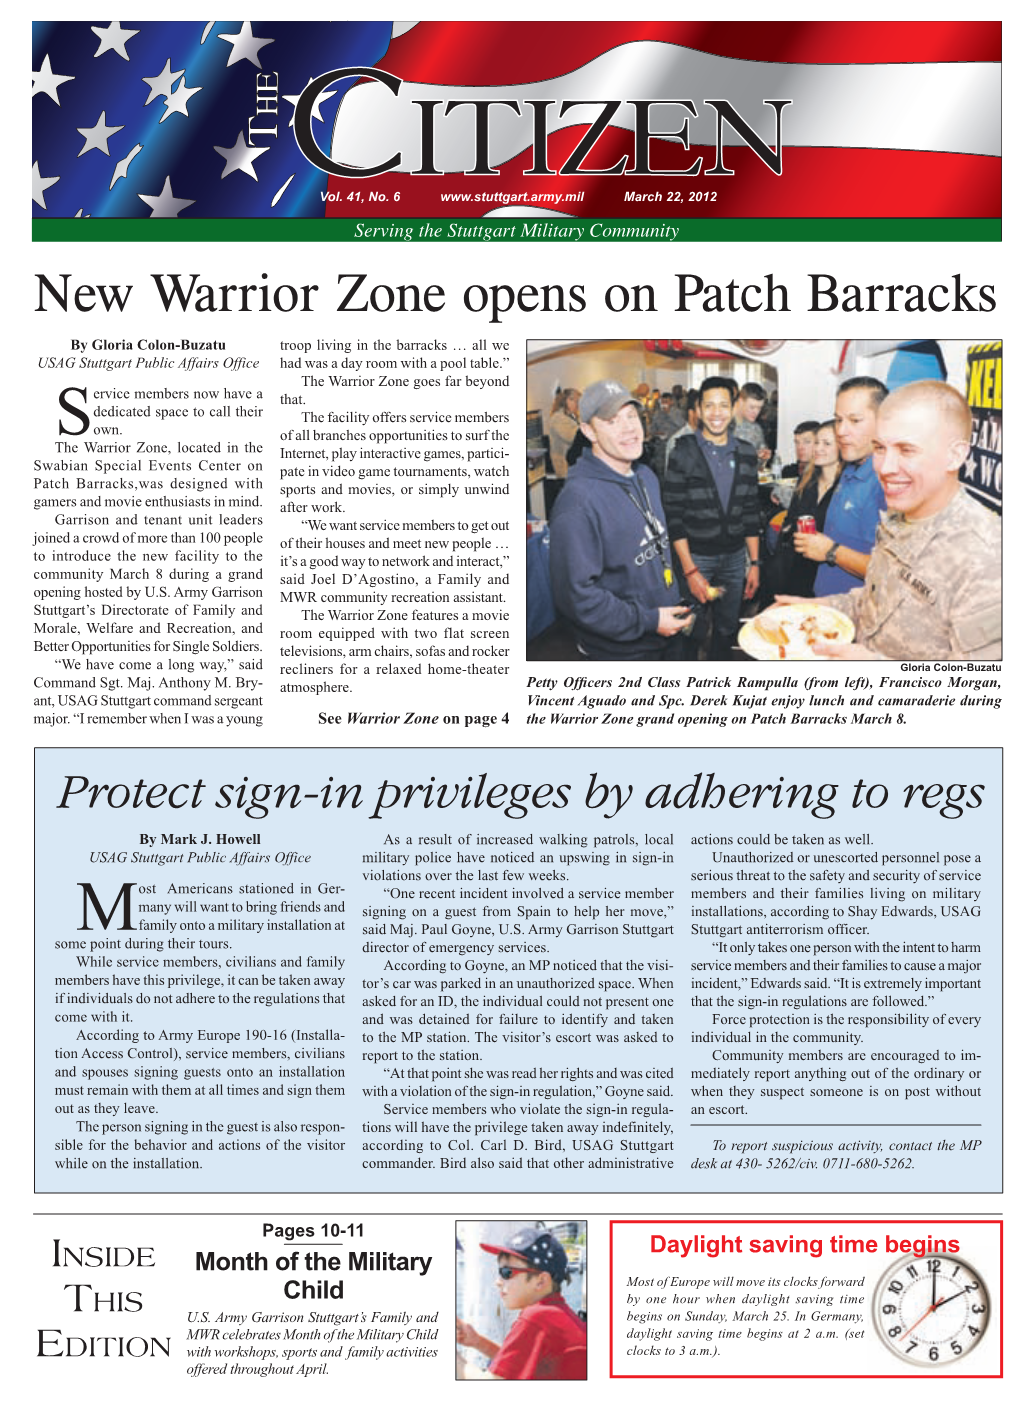 New Warrior Zone Opens on Patch Barracks